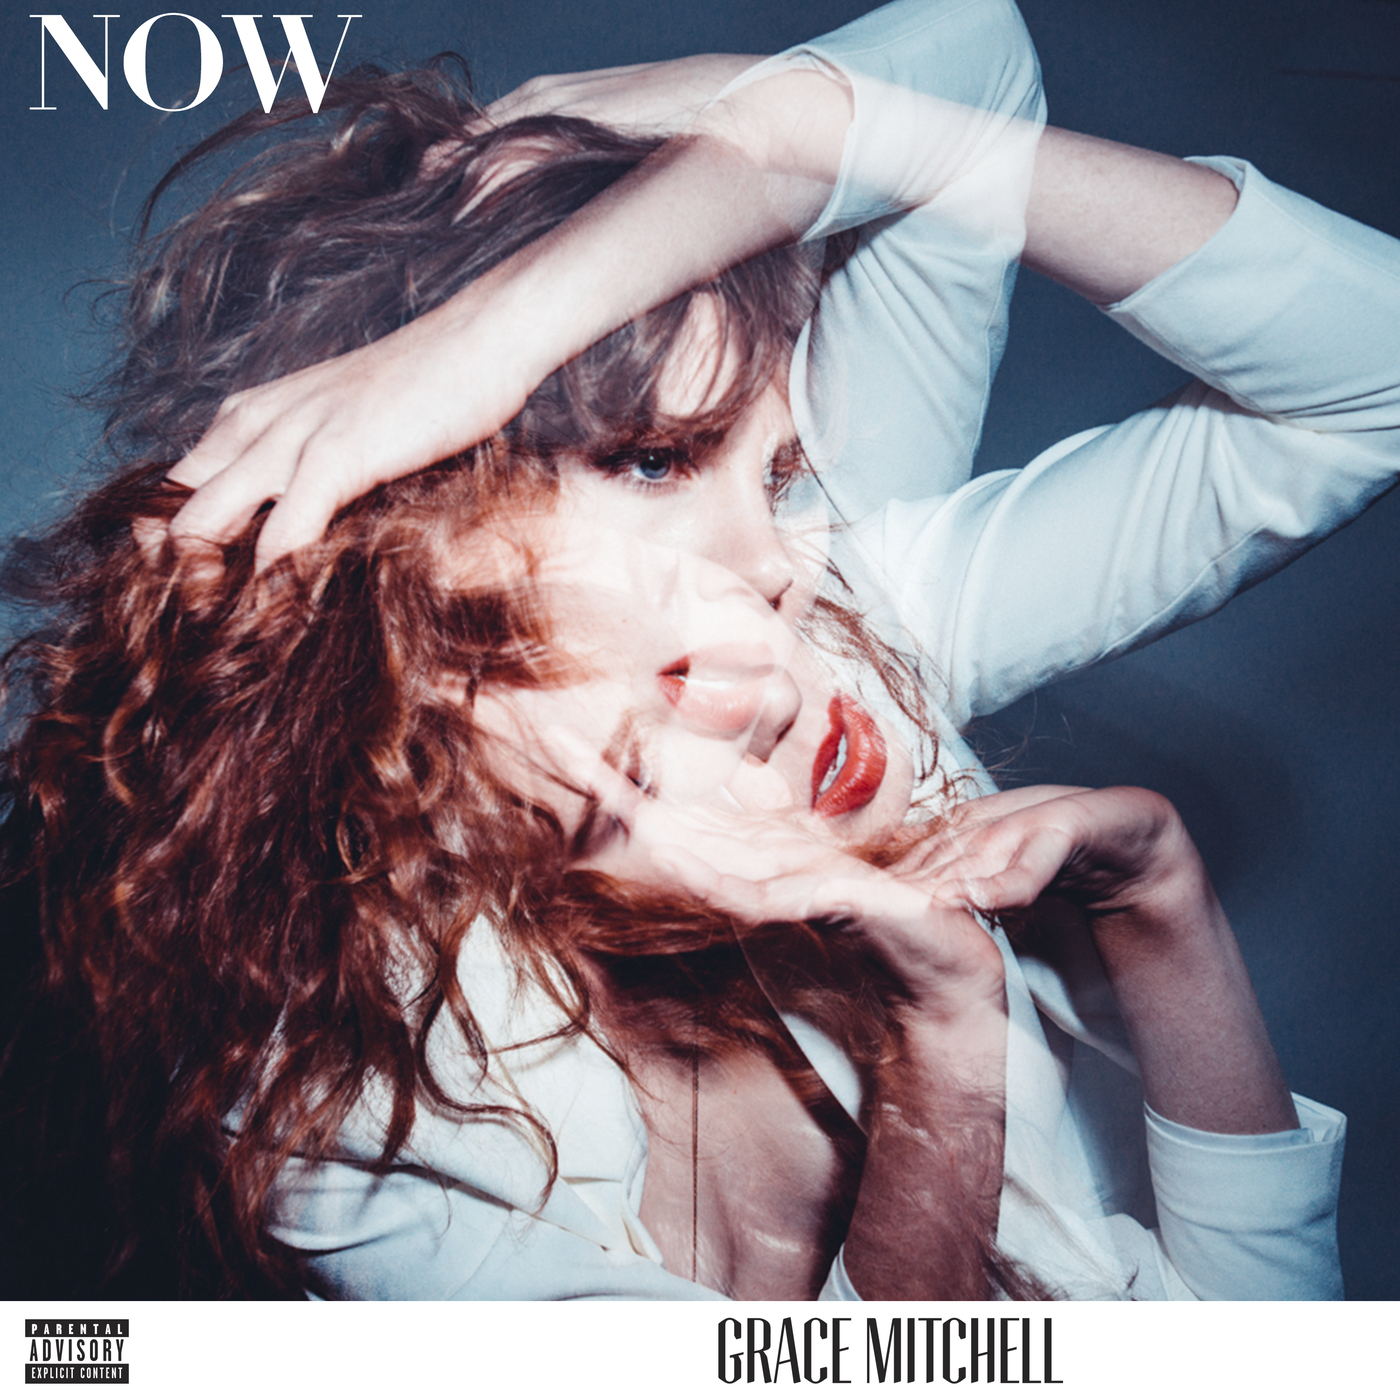 Grace Mitchell – “Now”